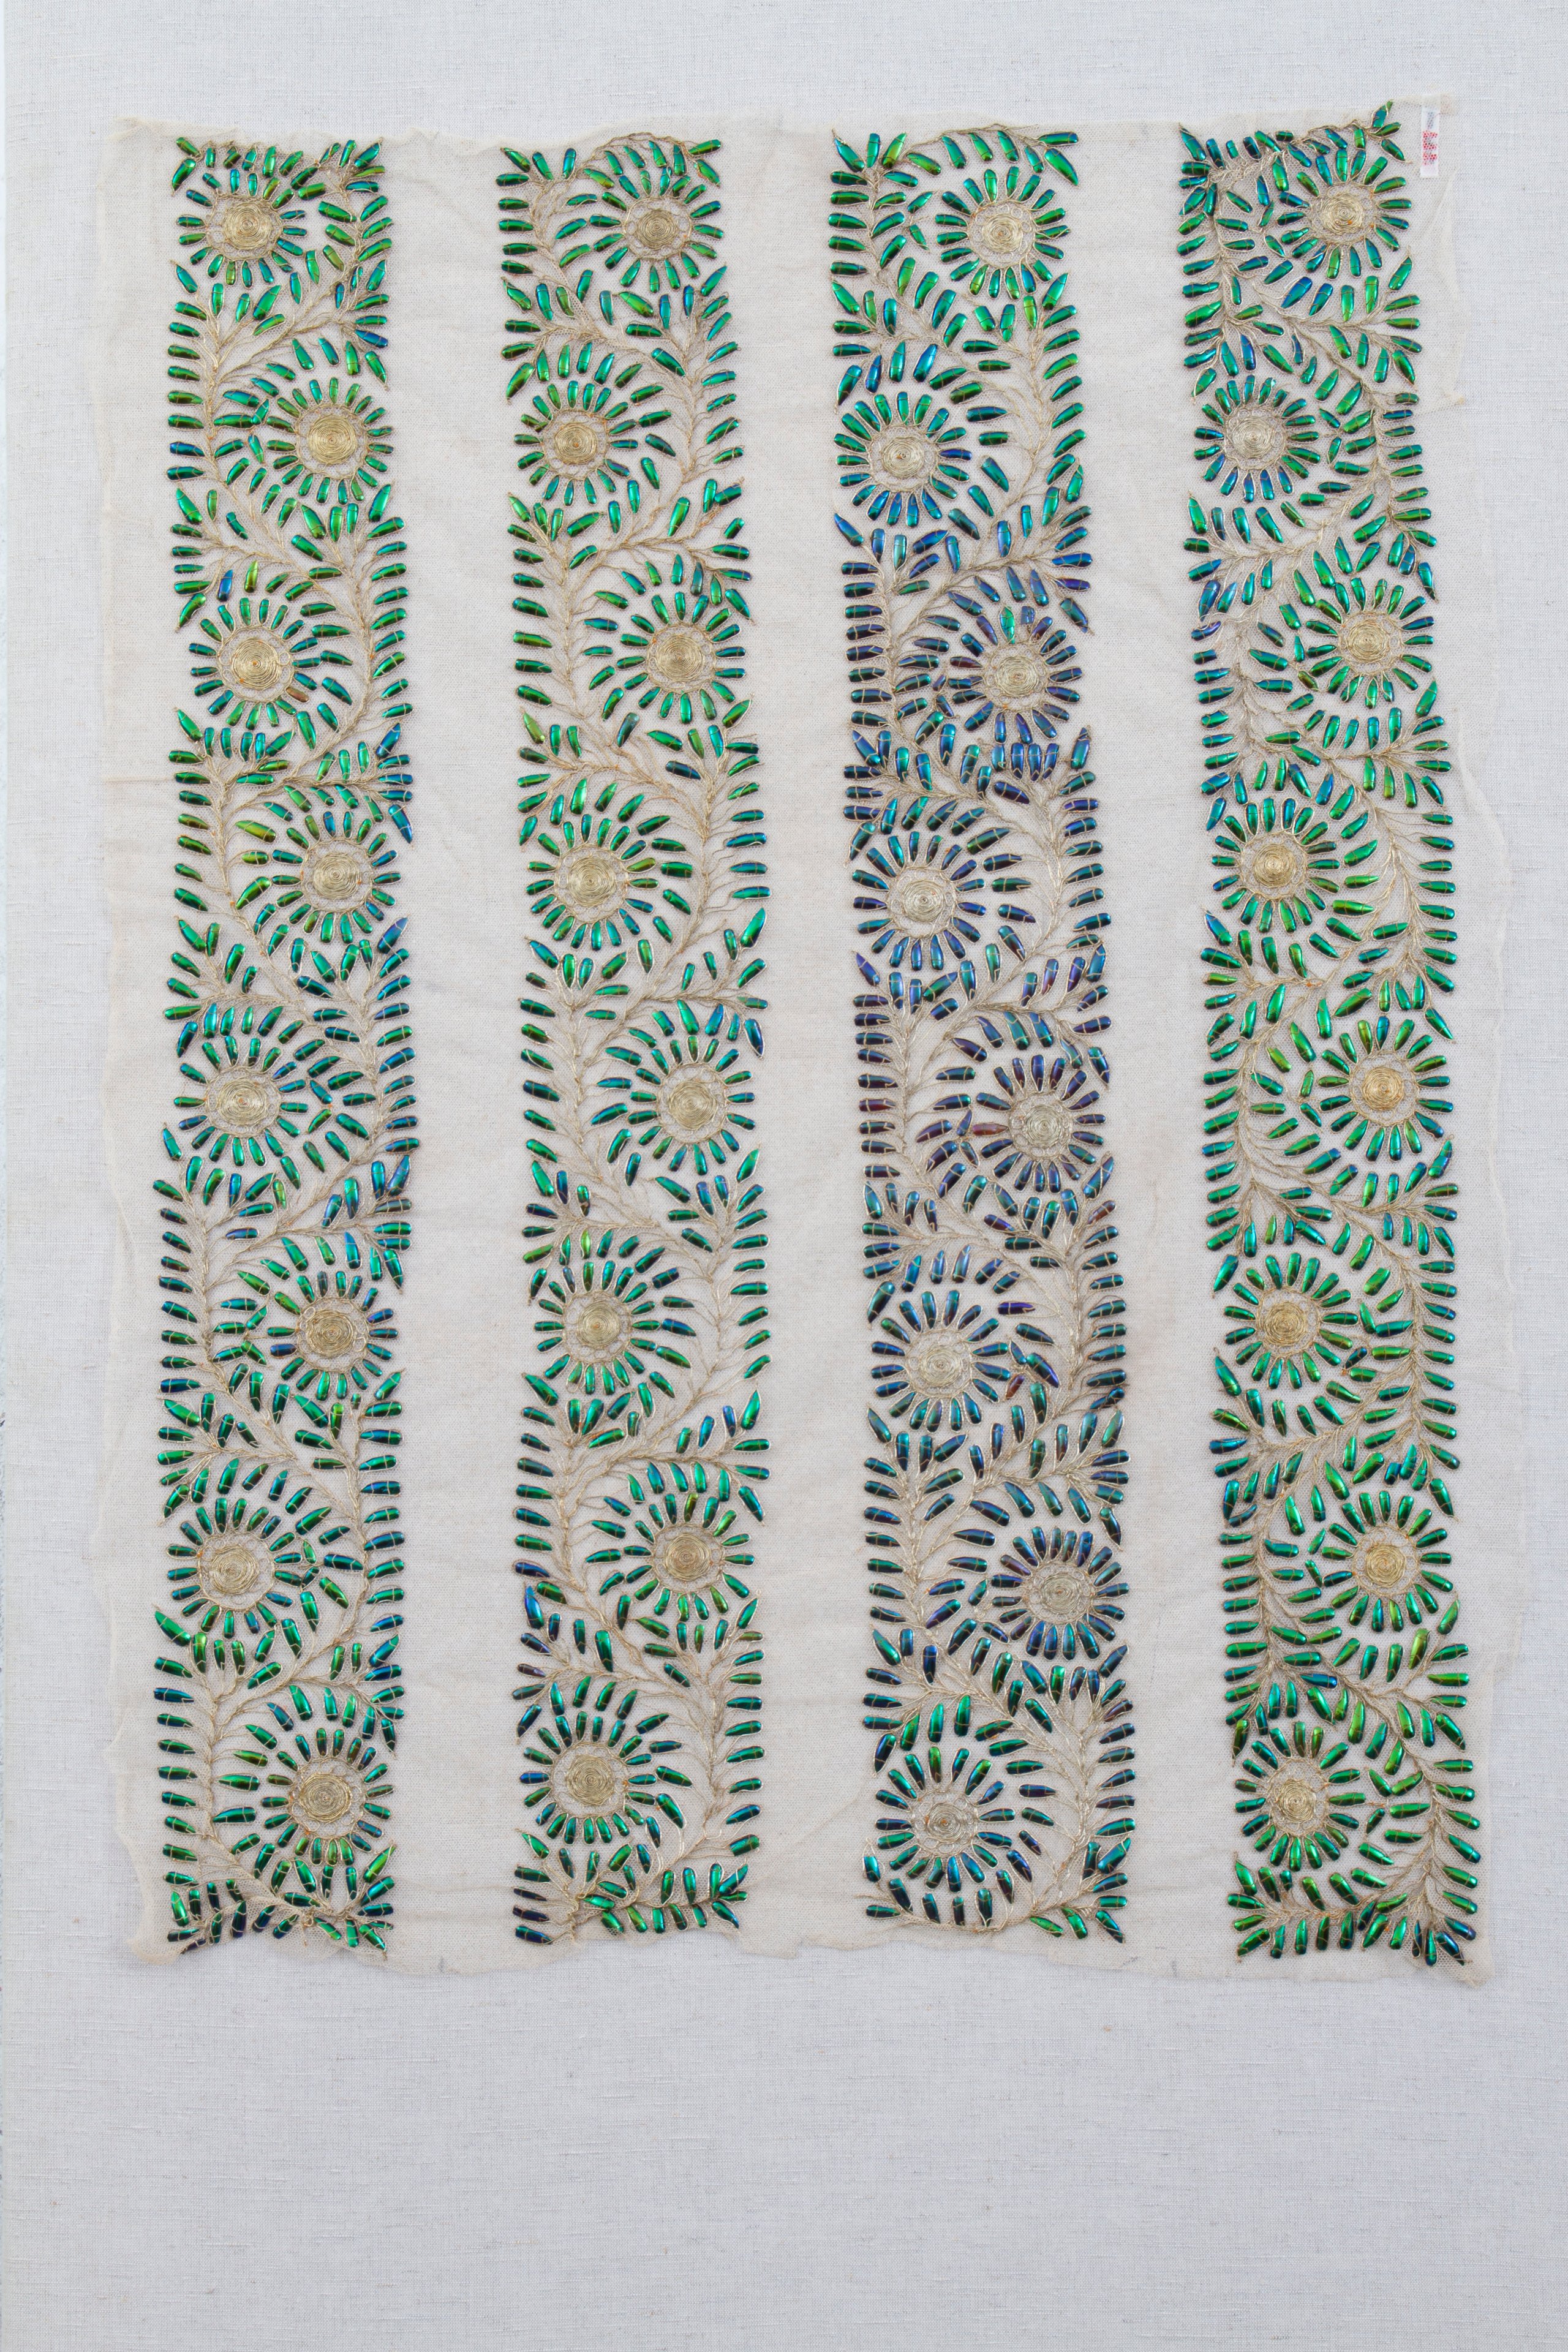 Textile length decorated with beetle wings, India